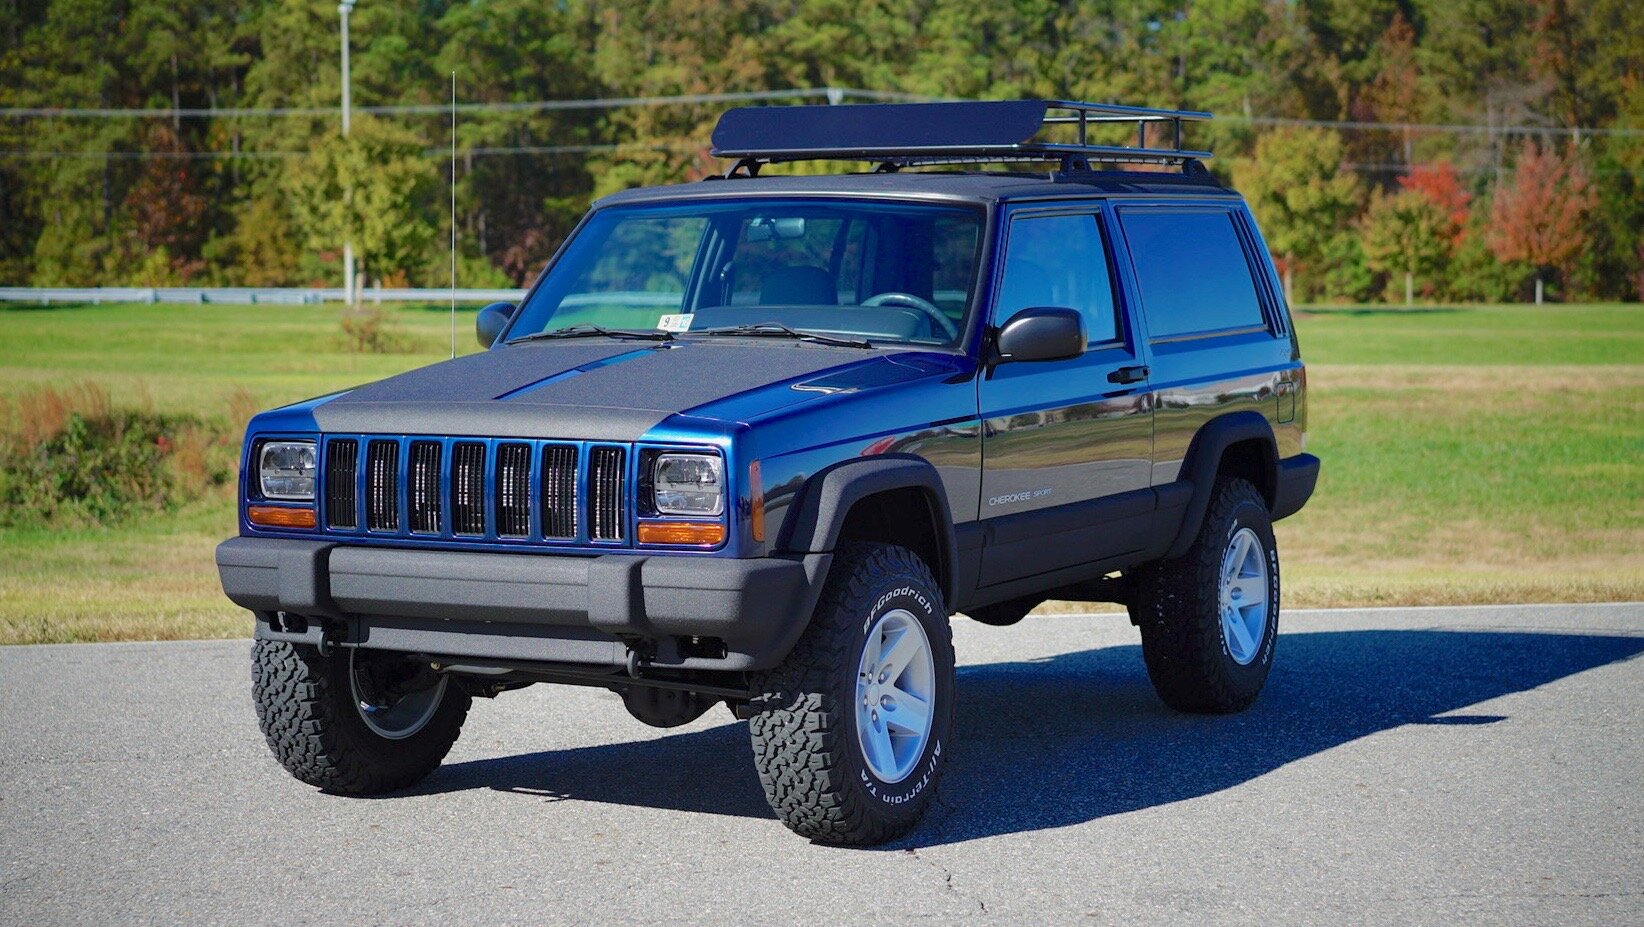 2000 jeep cherokee stage 2 - sold.